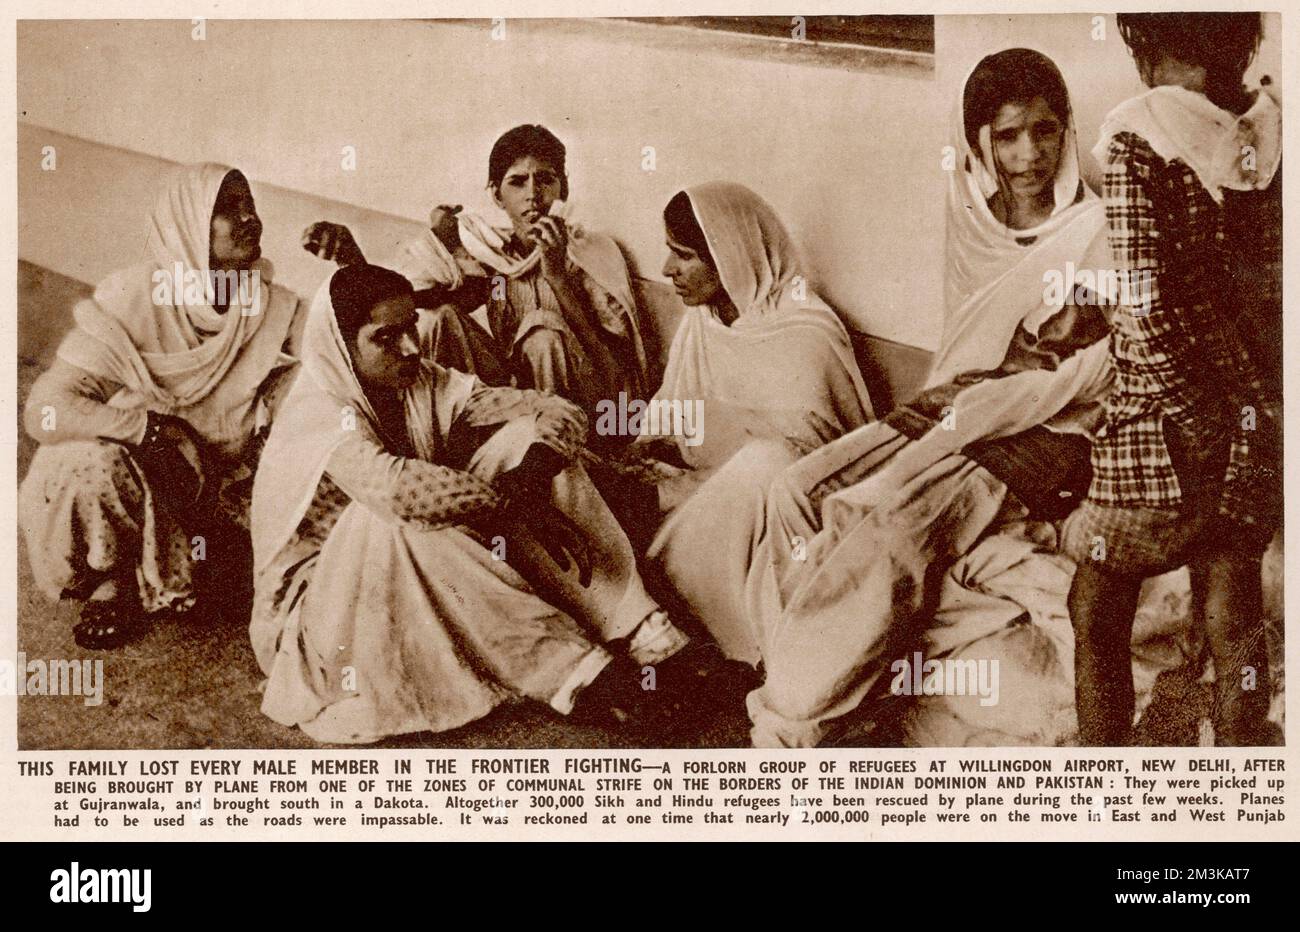 A family who lost every male member in the frontier fighting - a forlorn group of refugees at Willingdon airport, New Delhi, after being brought by plane from one of the zones of communal strife on the borders of India and Pakistan.  They were picked up at Gujranwala and brought south in a Dakota.  Altogether 300,000 Sikh and Hindu refugees were rescued by plane in September 1947, as roads were impassable with an estimated two million people on the move in East and West Punjab.    1947 Stock Photo